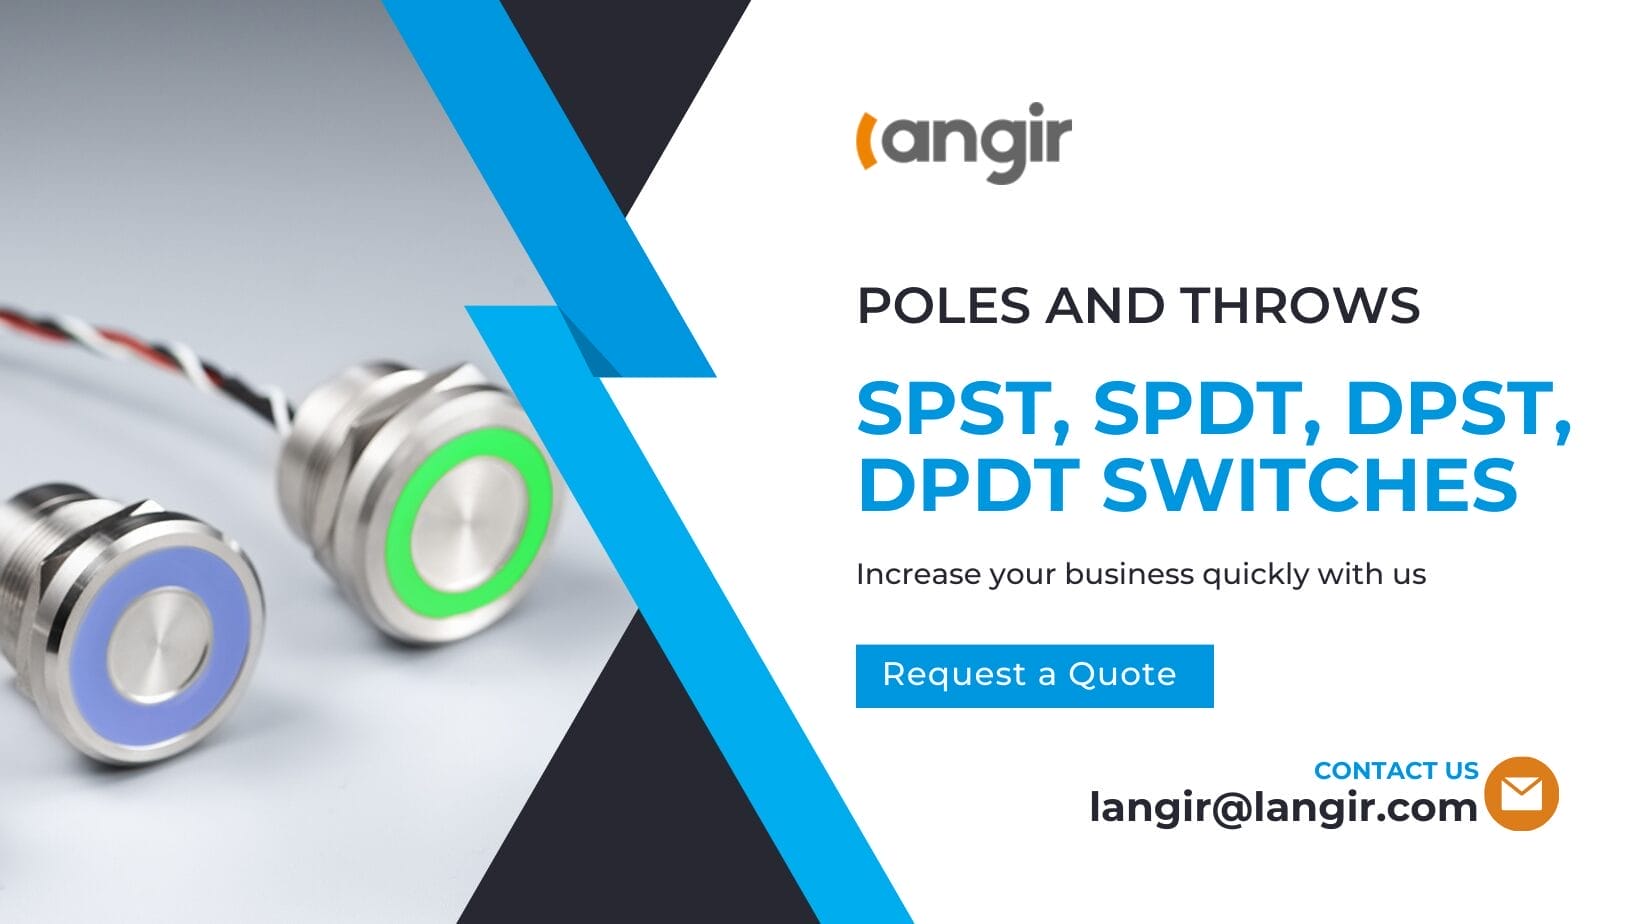 Poles and Throws SPST, SPDT, DPST, DPDT Switches